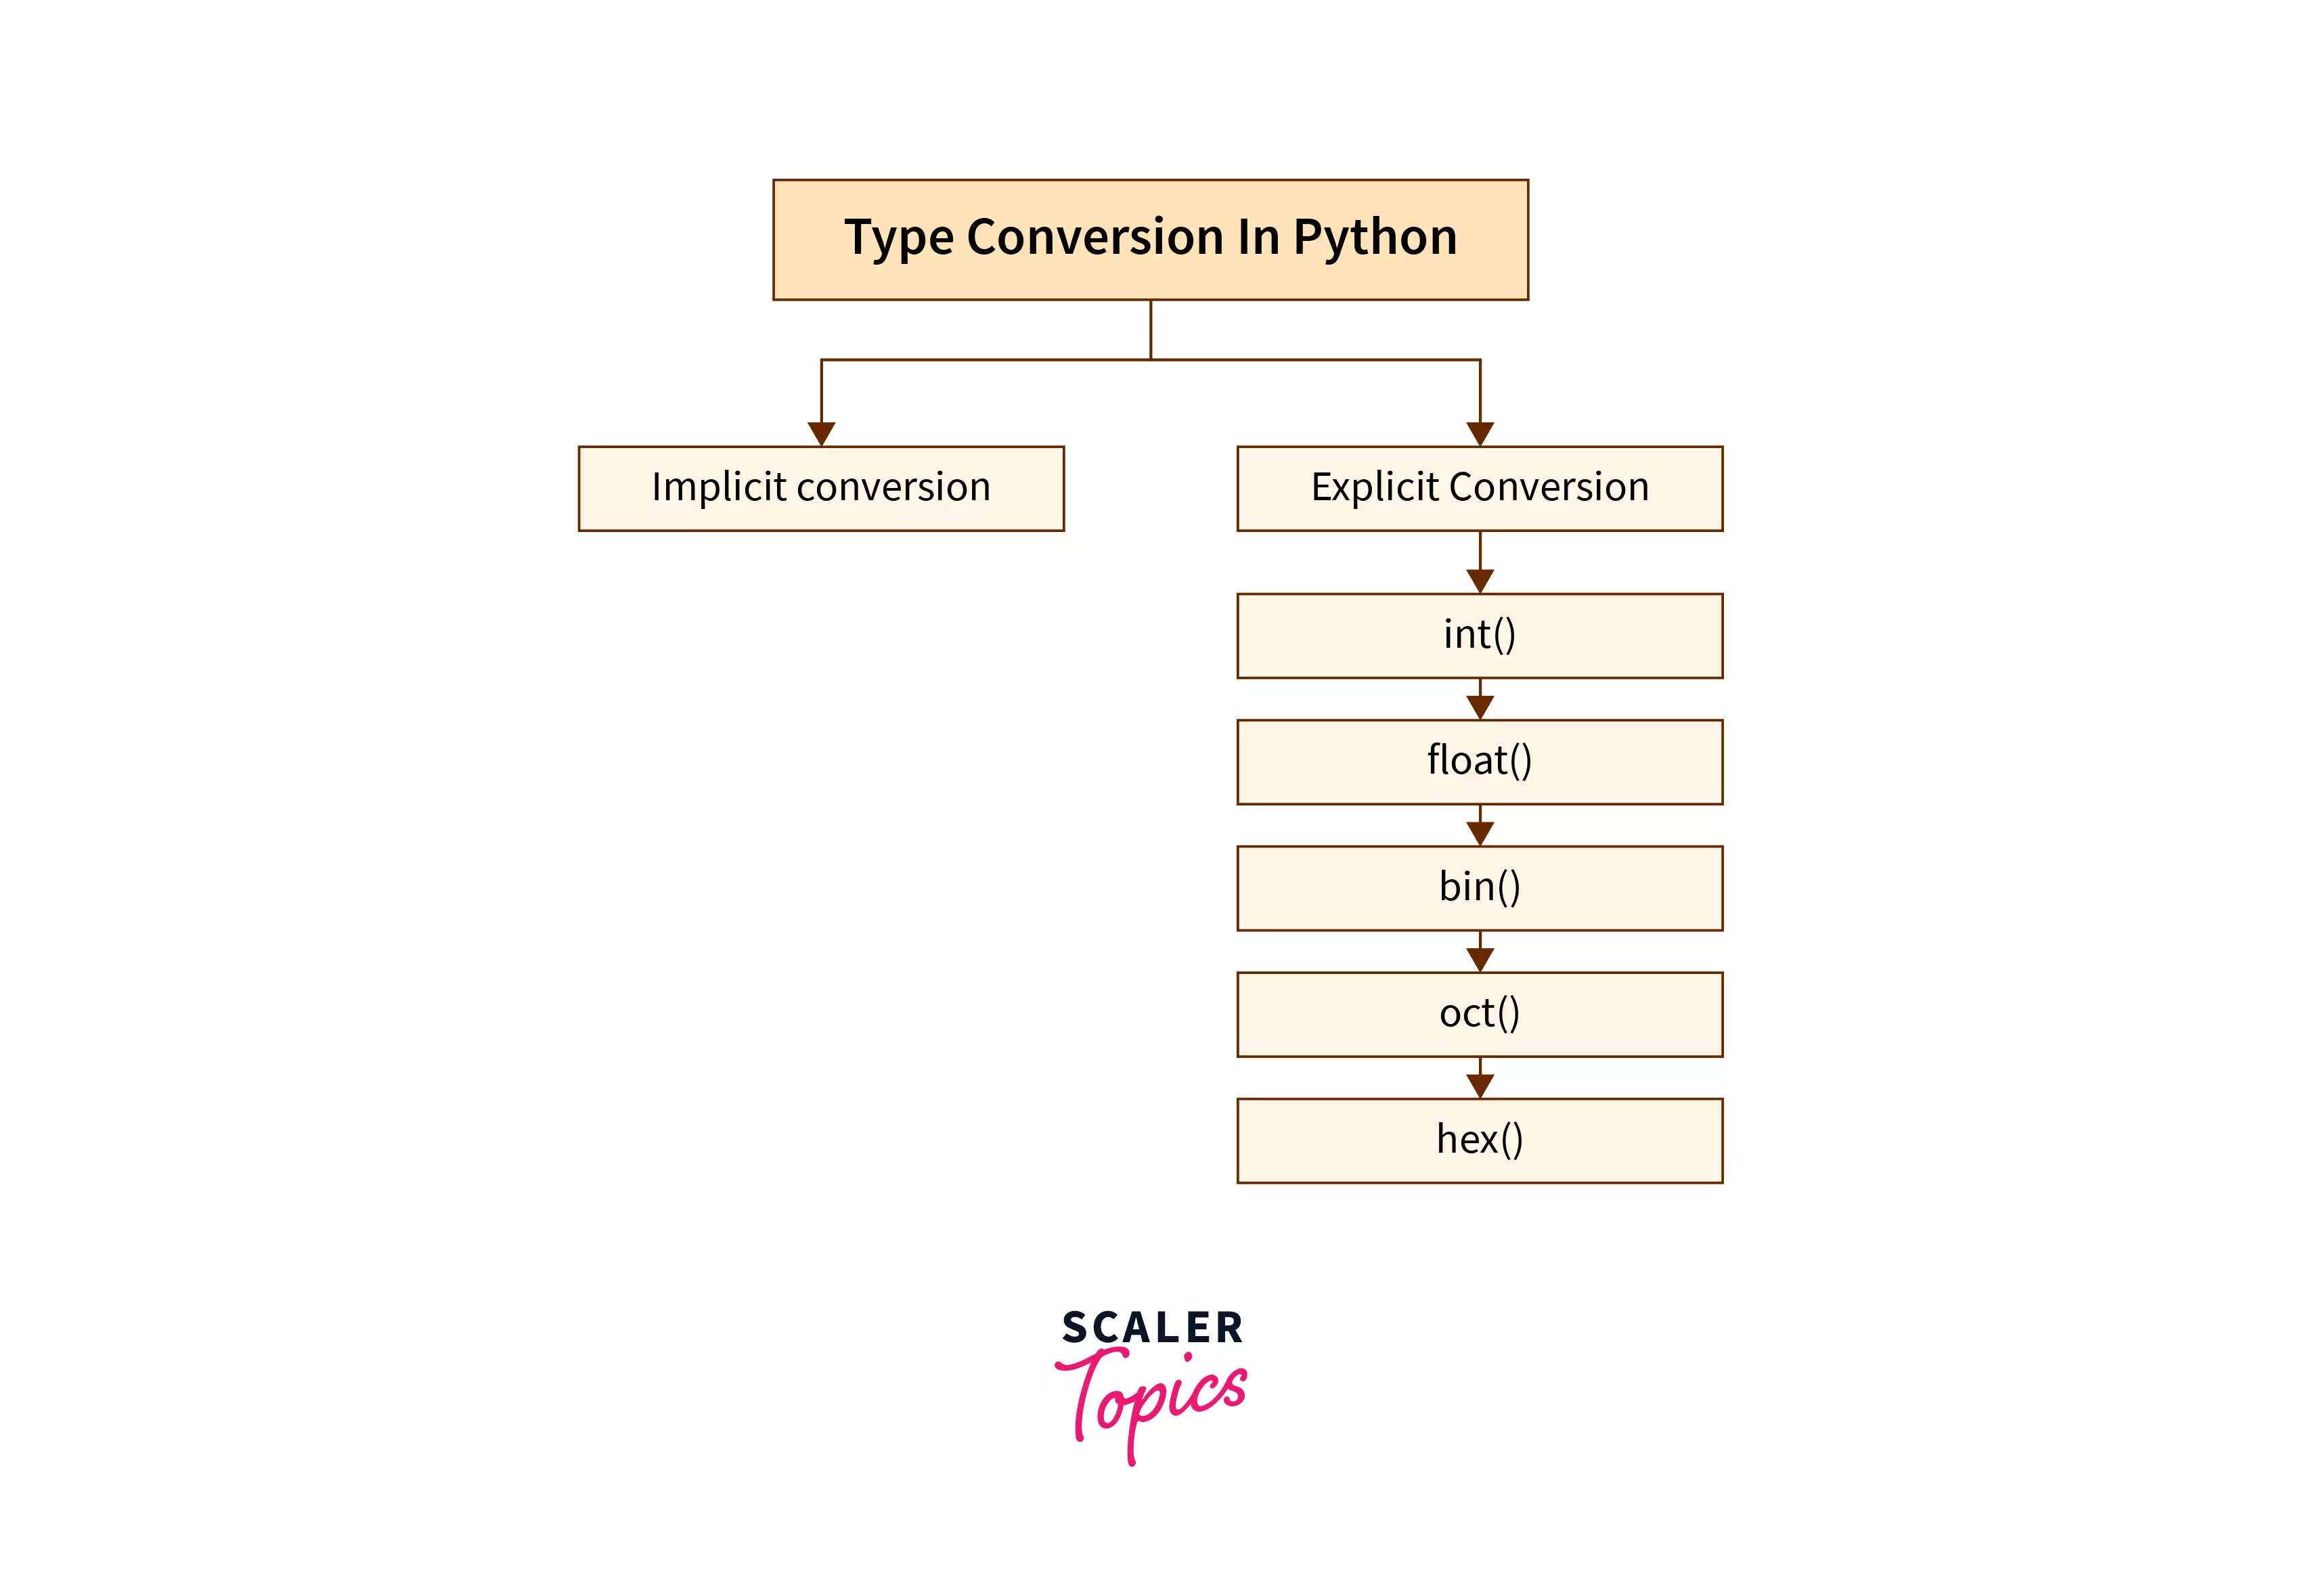 type conversions in Python